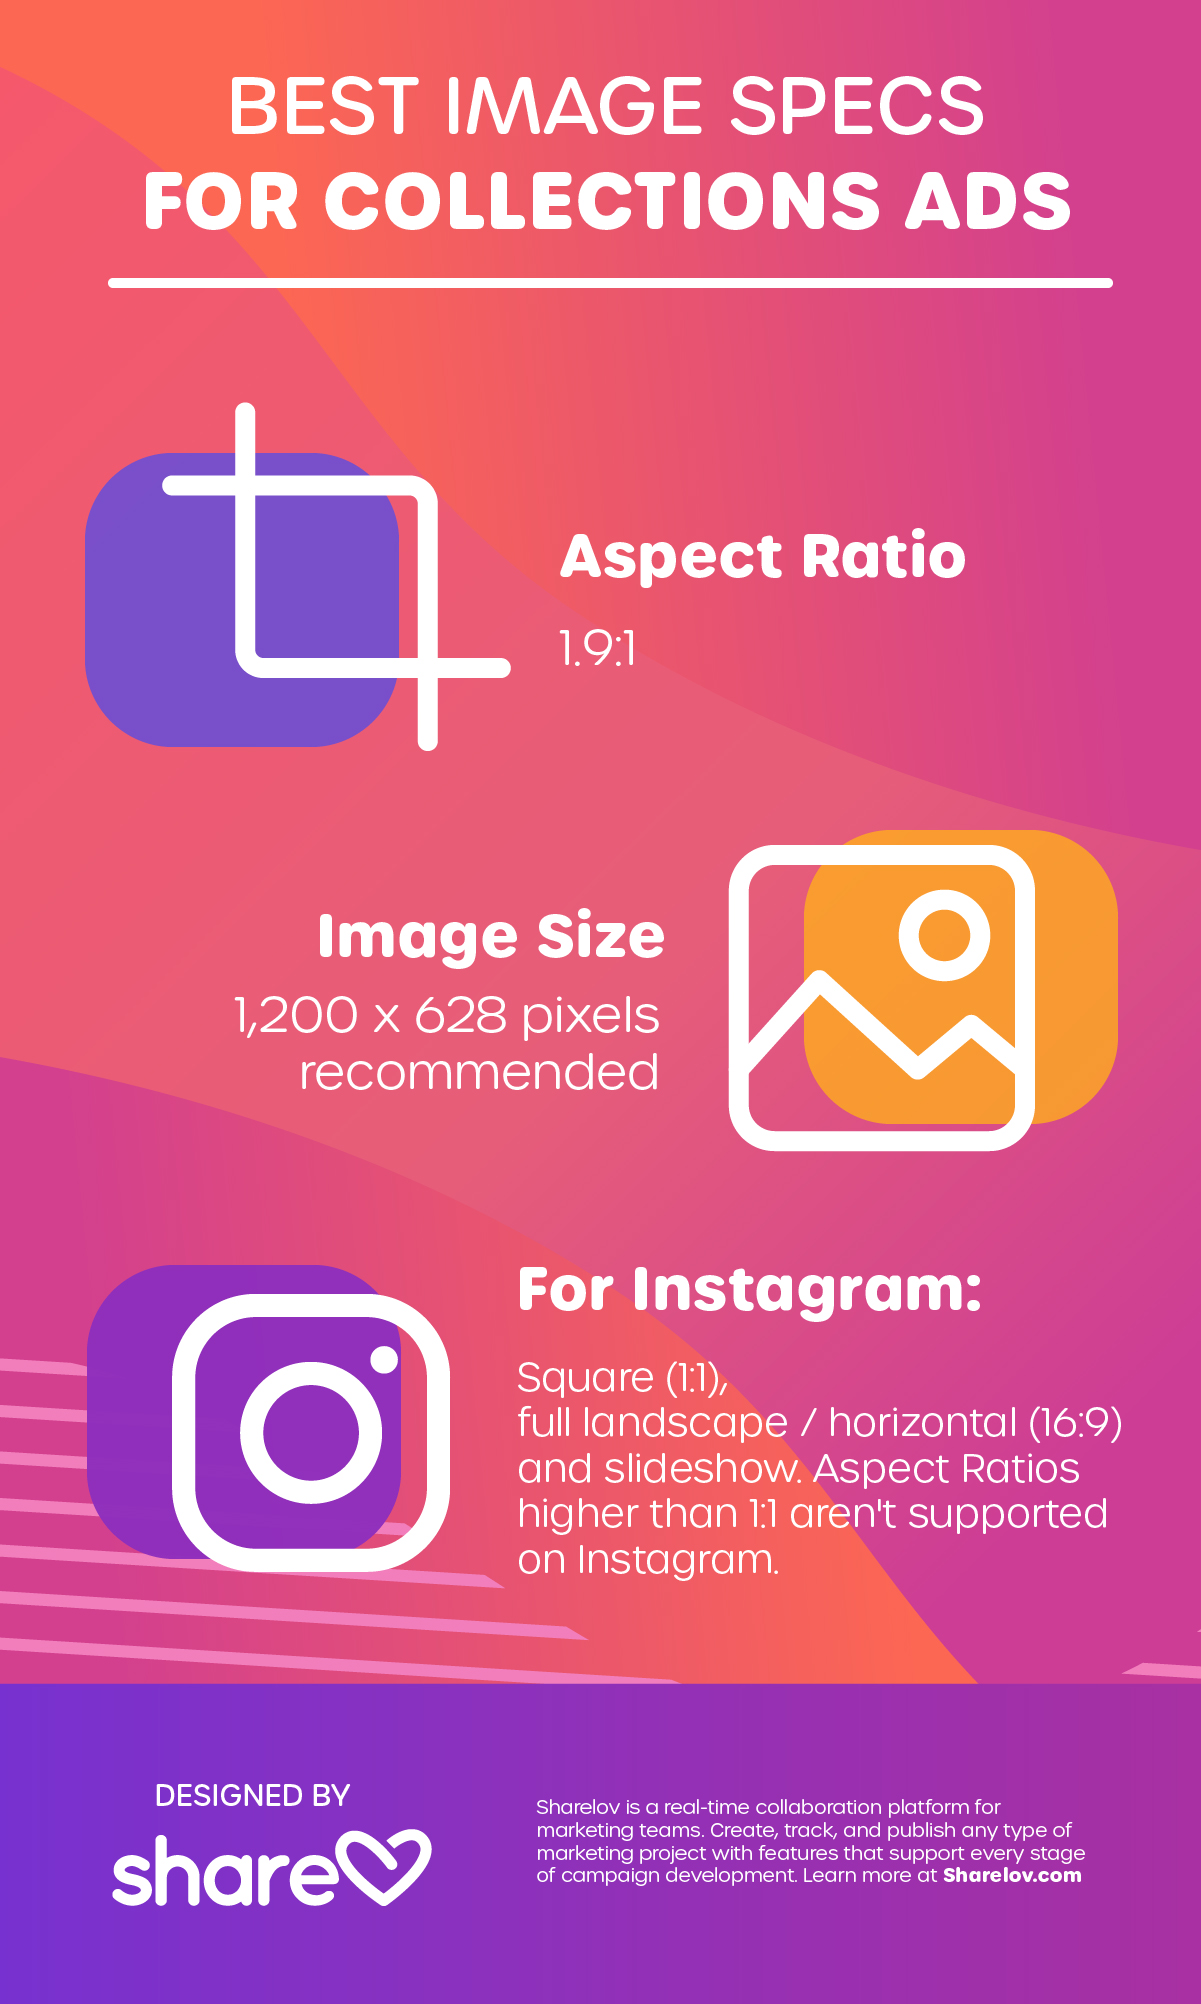 Best Image Specs for Collections Ads infographic